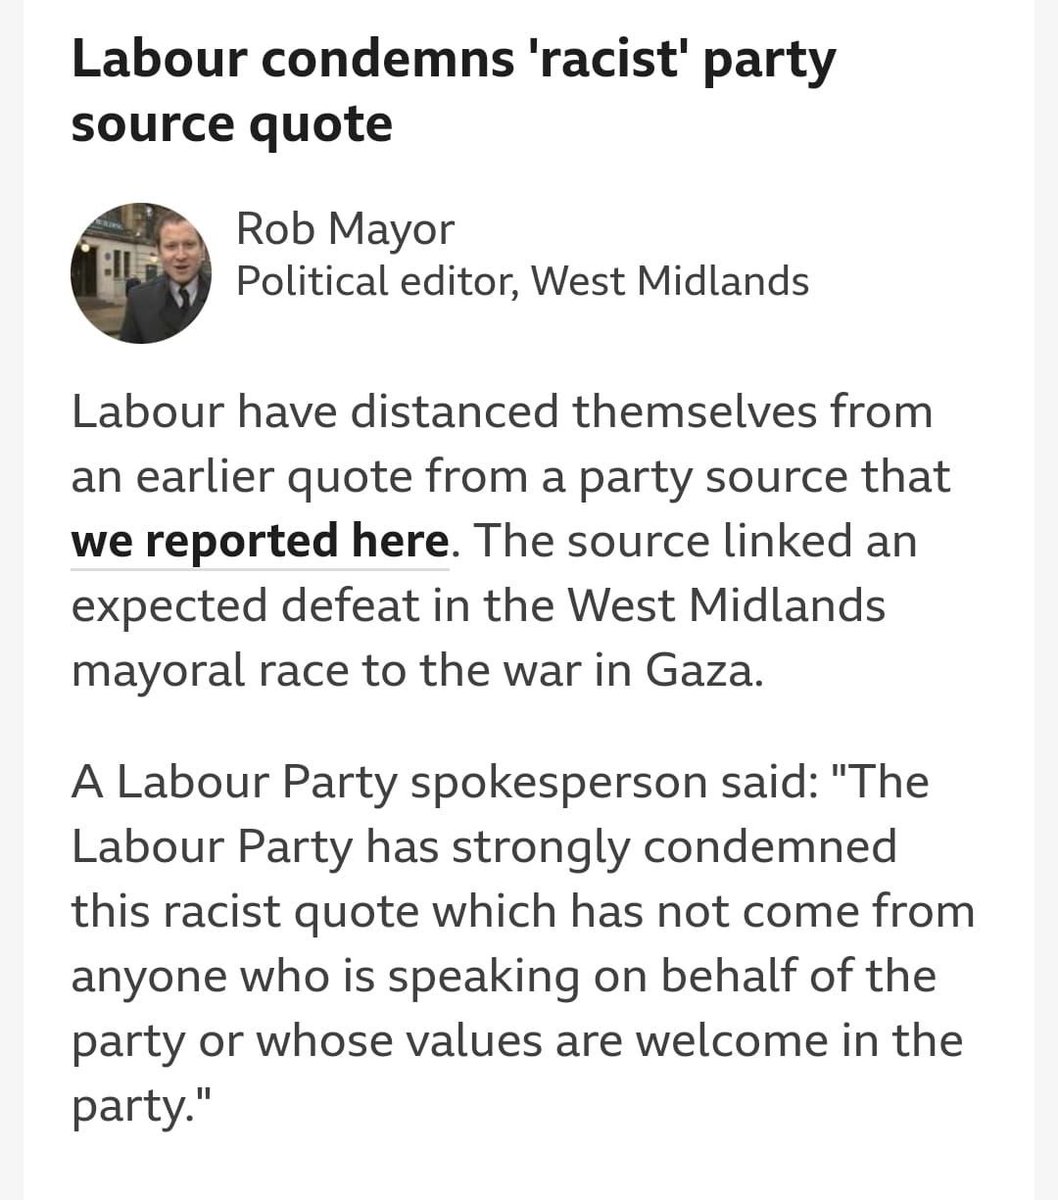 Bit of a blow for one of Keir’s people here, finding out they’re not welcome in the party. Luckily for them it’s just for show.